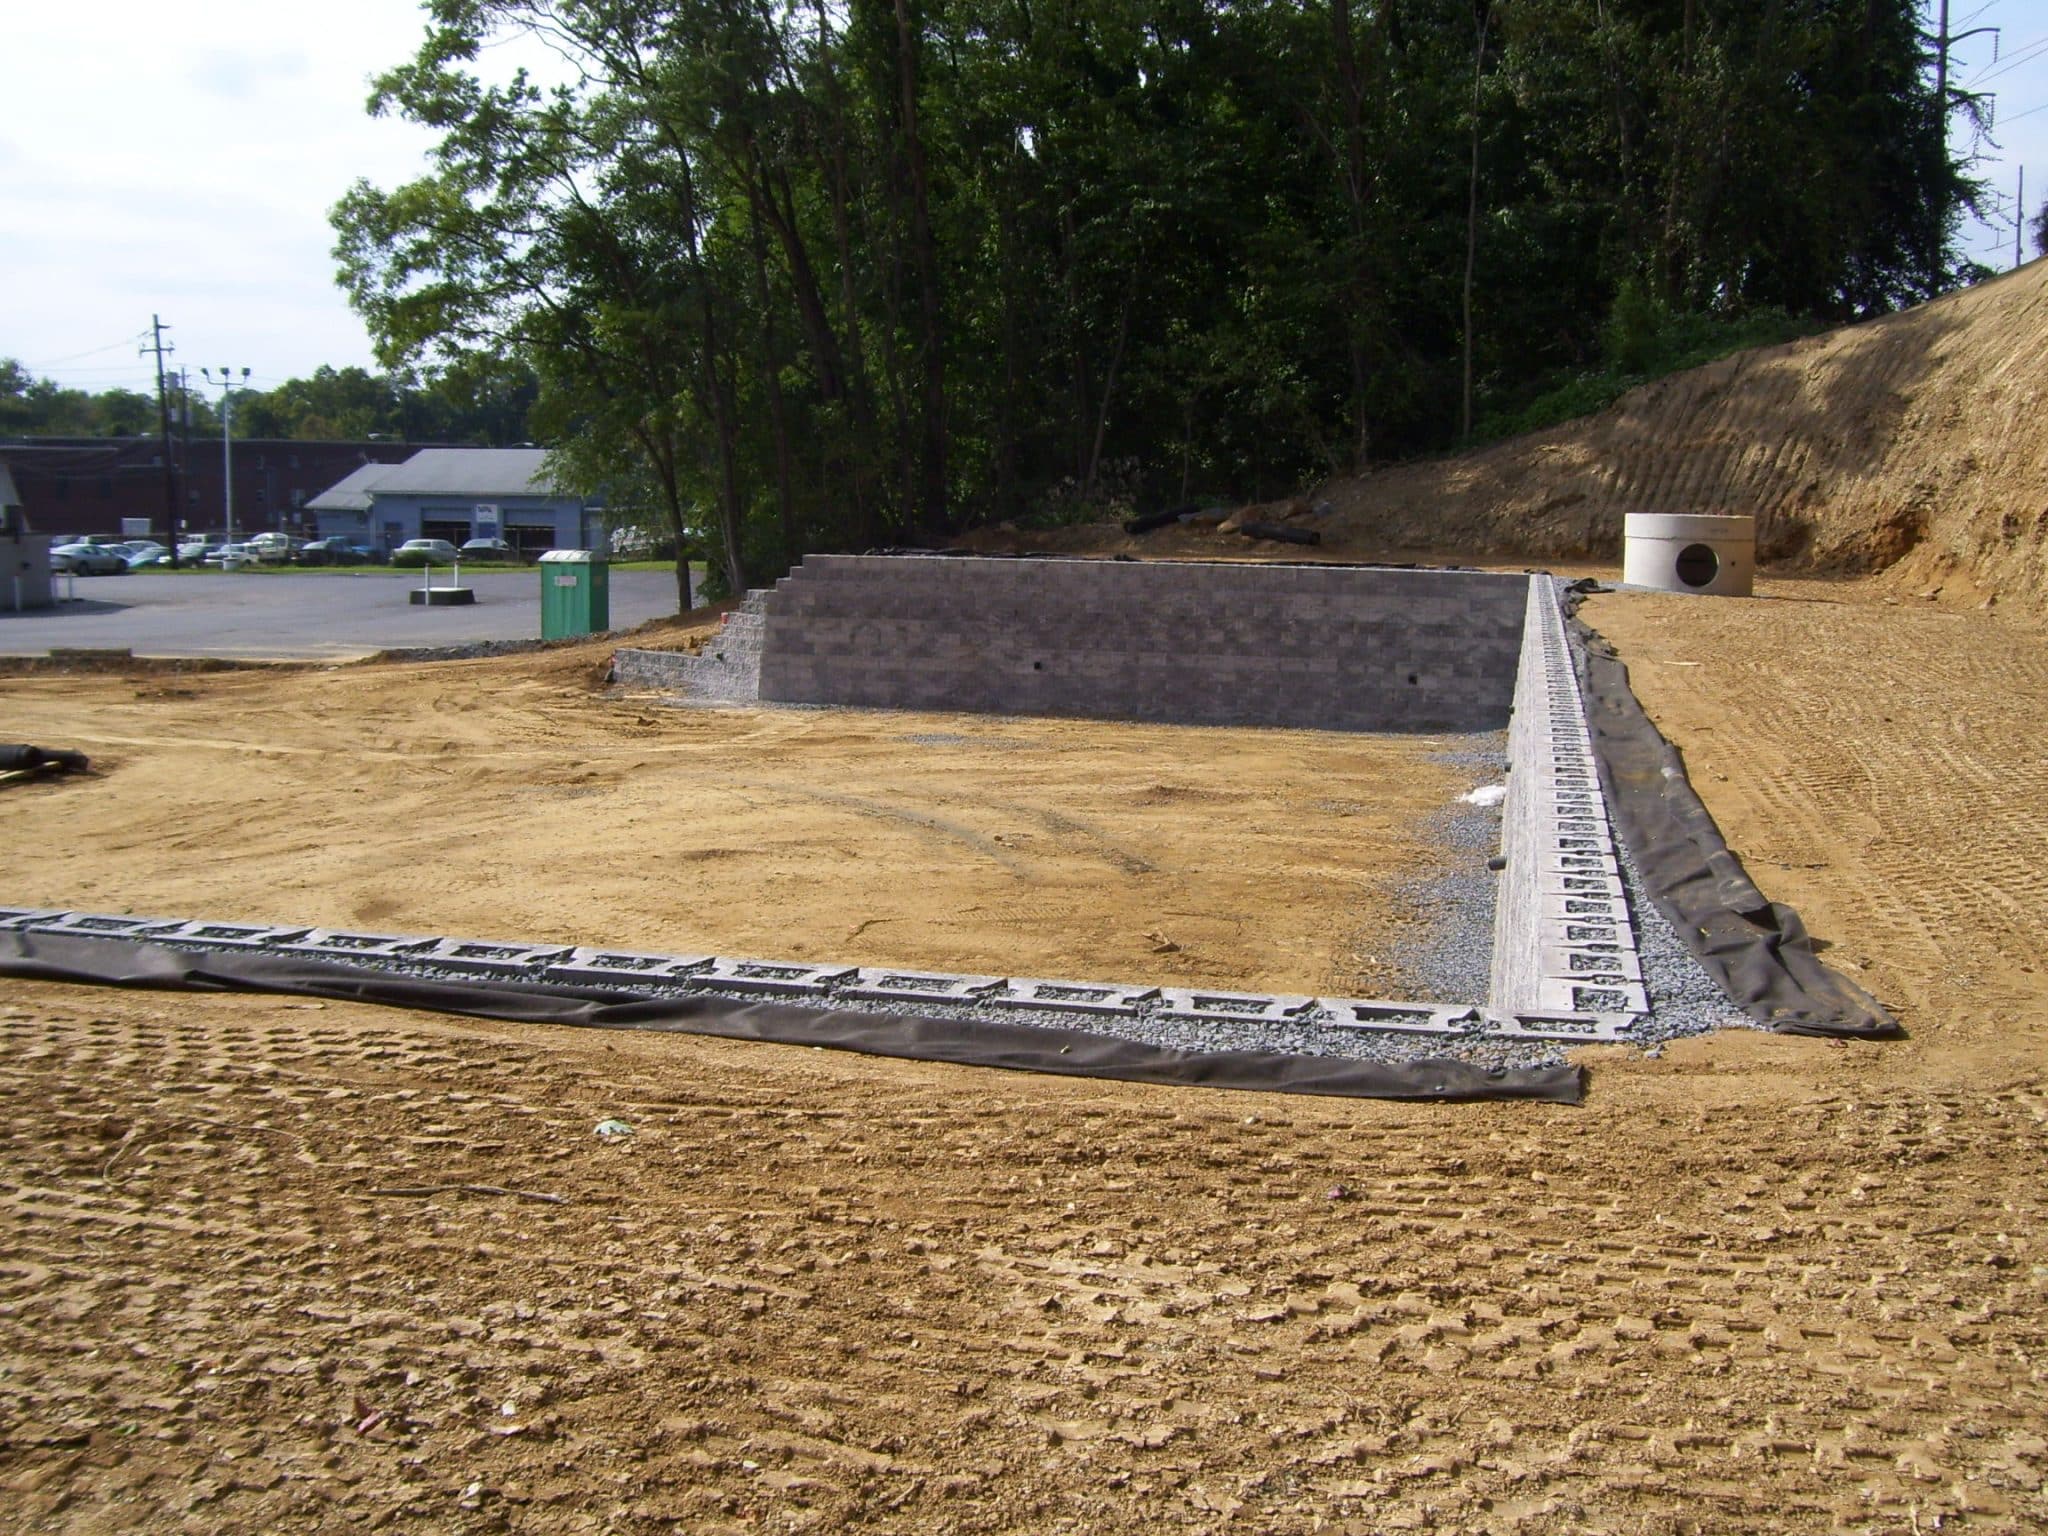 Commercial CornerStone retaining wall with gravel backfill and filter fabric.